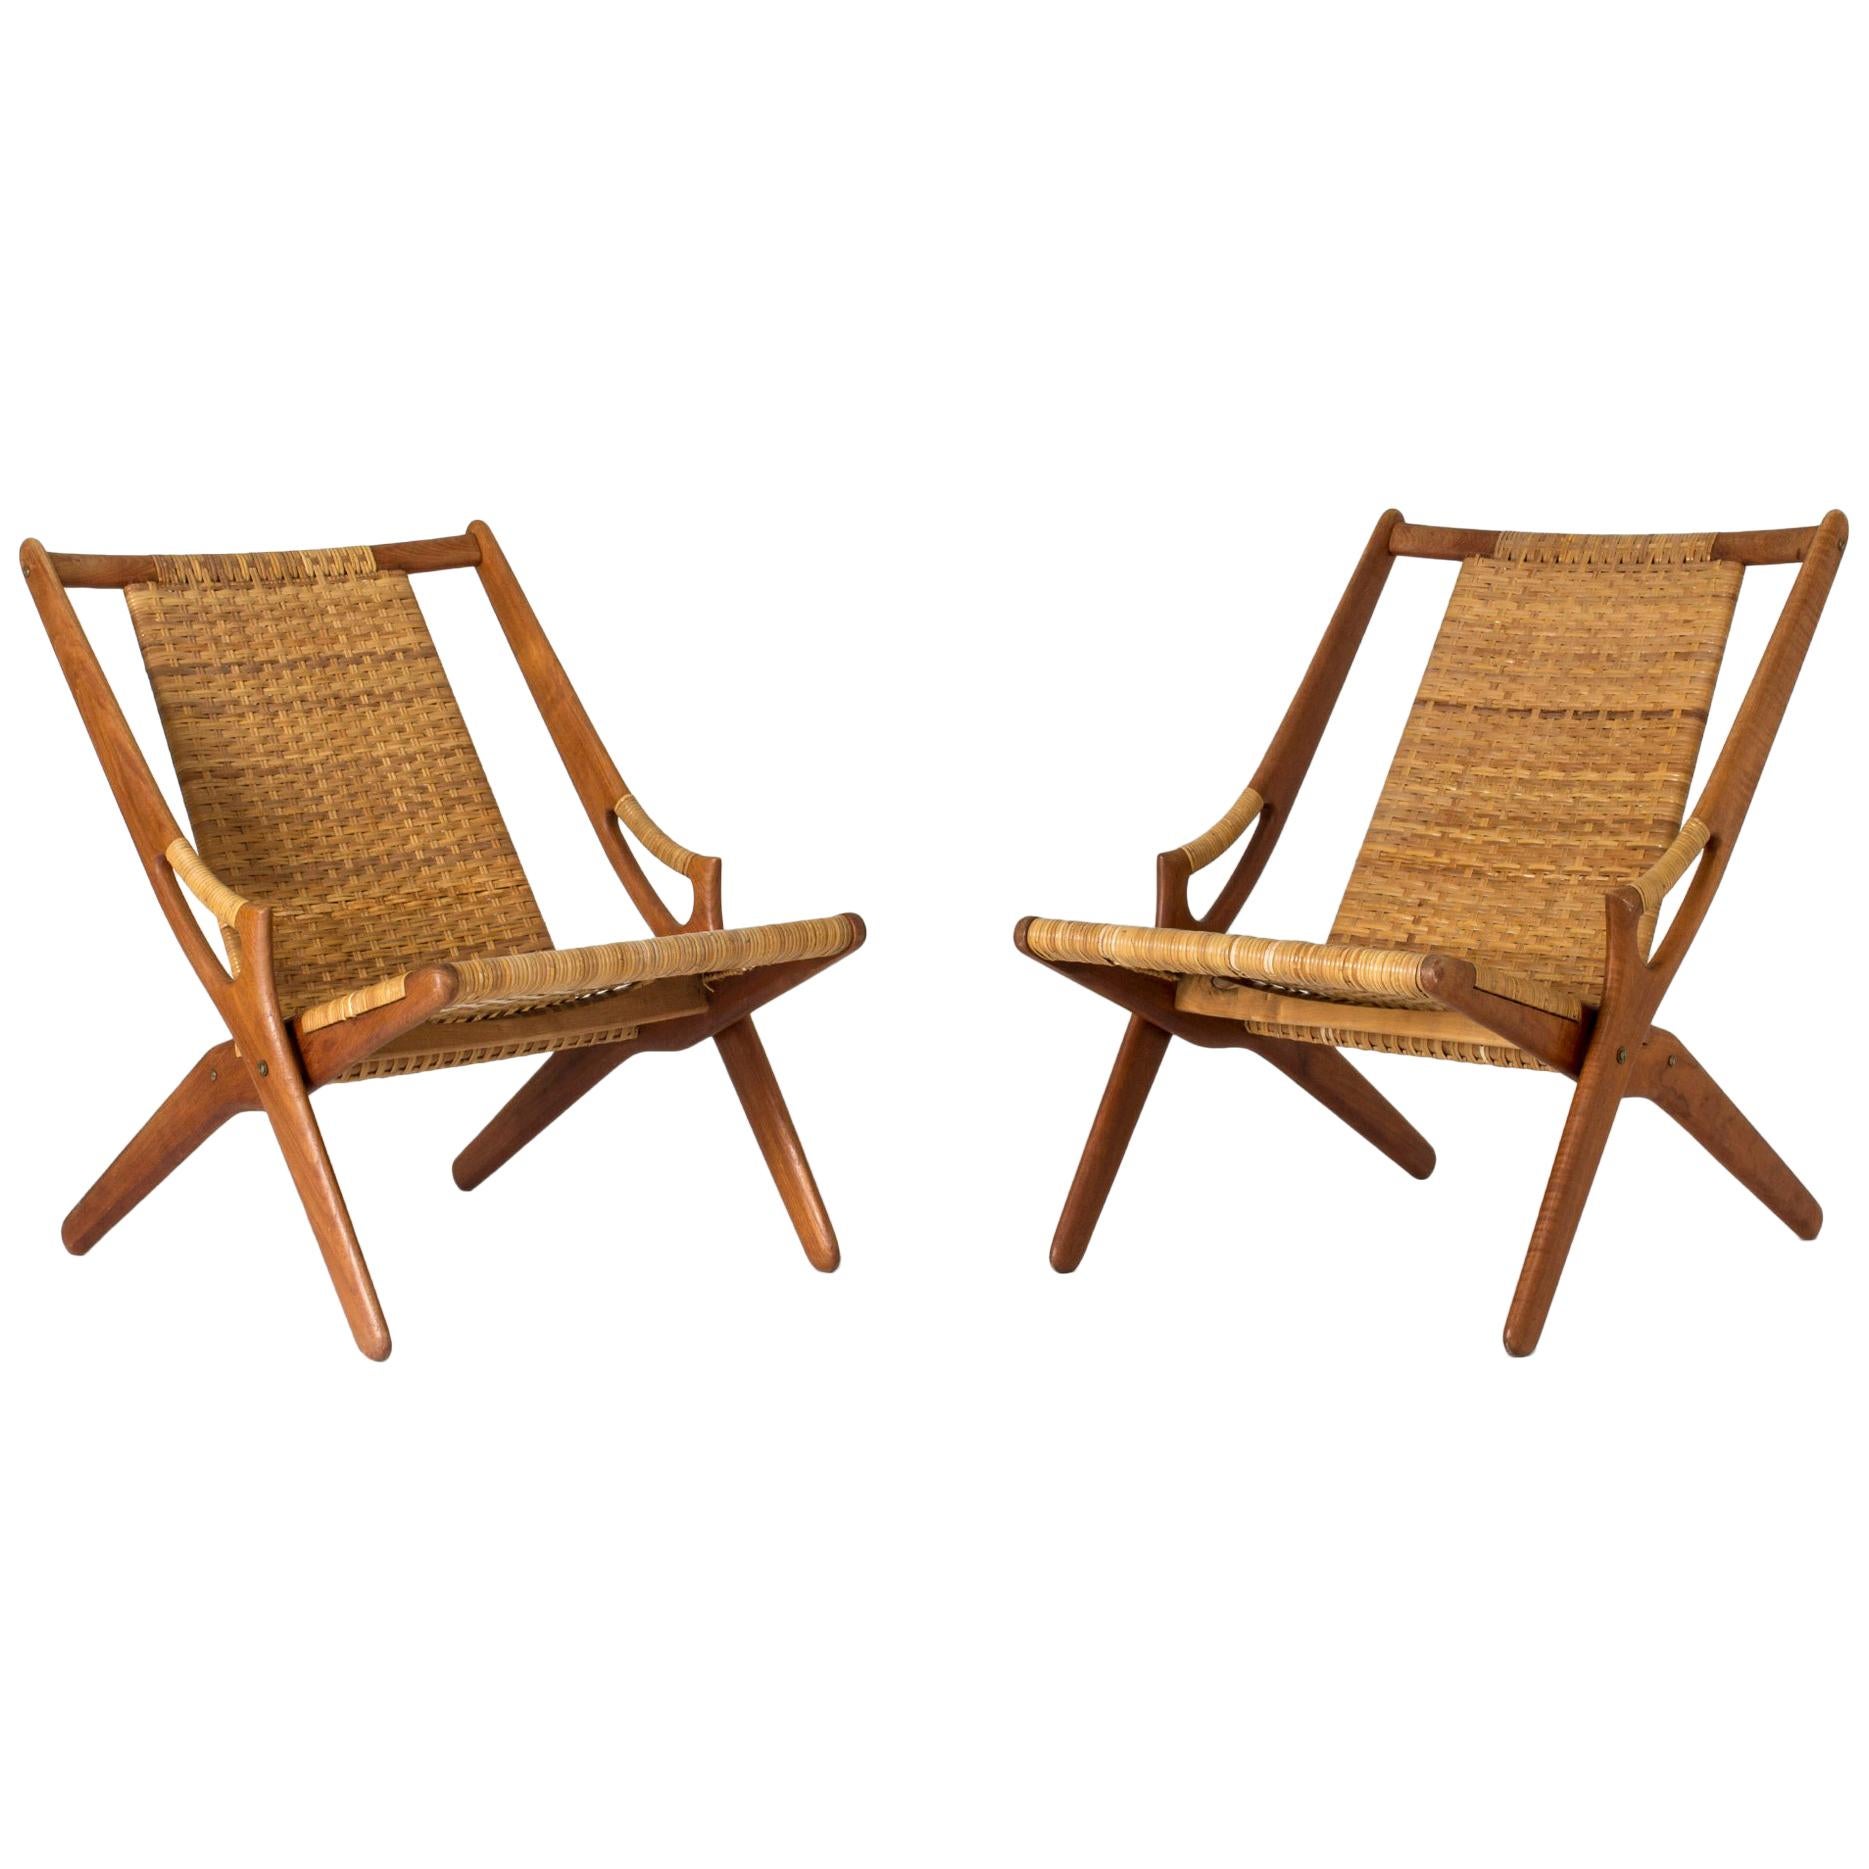 Pair of Rattan Lounge Chairs by Arne Hovmand Olsen